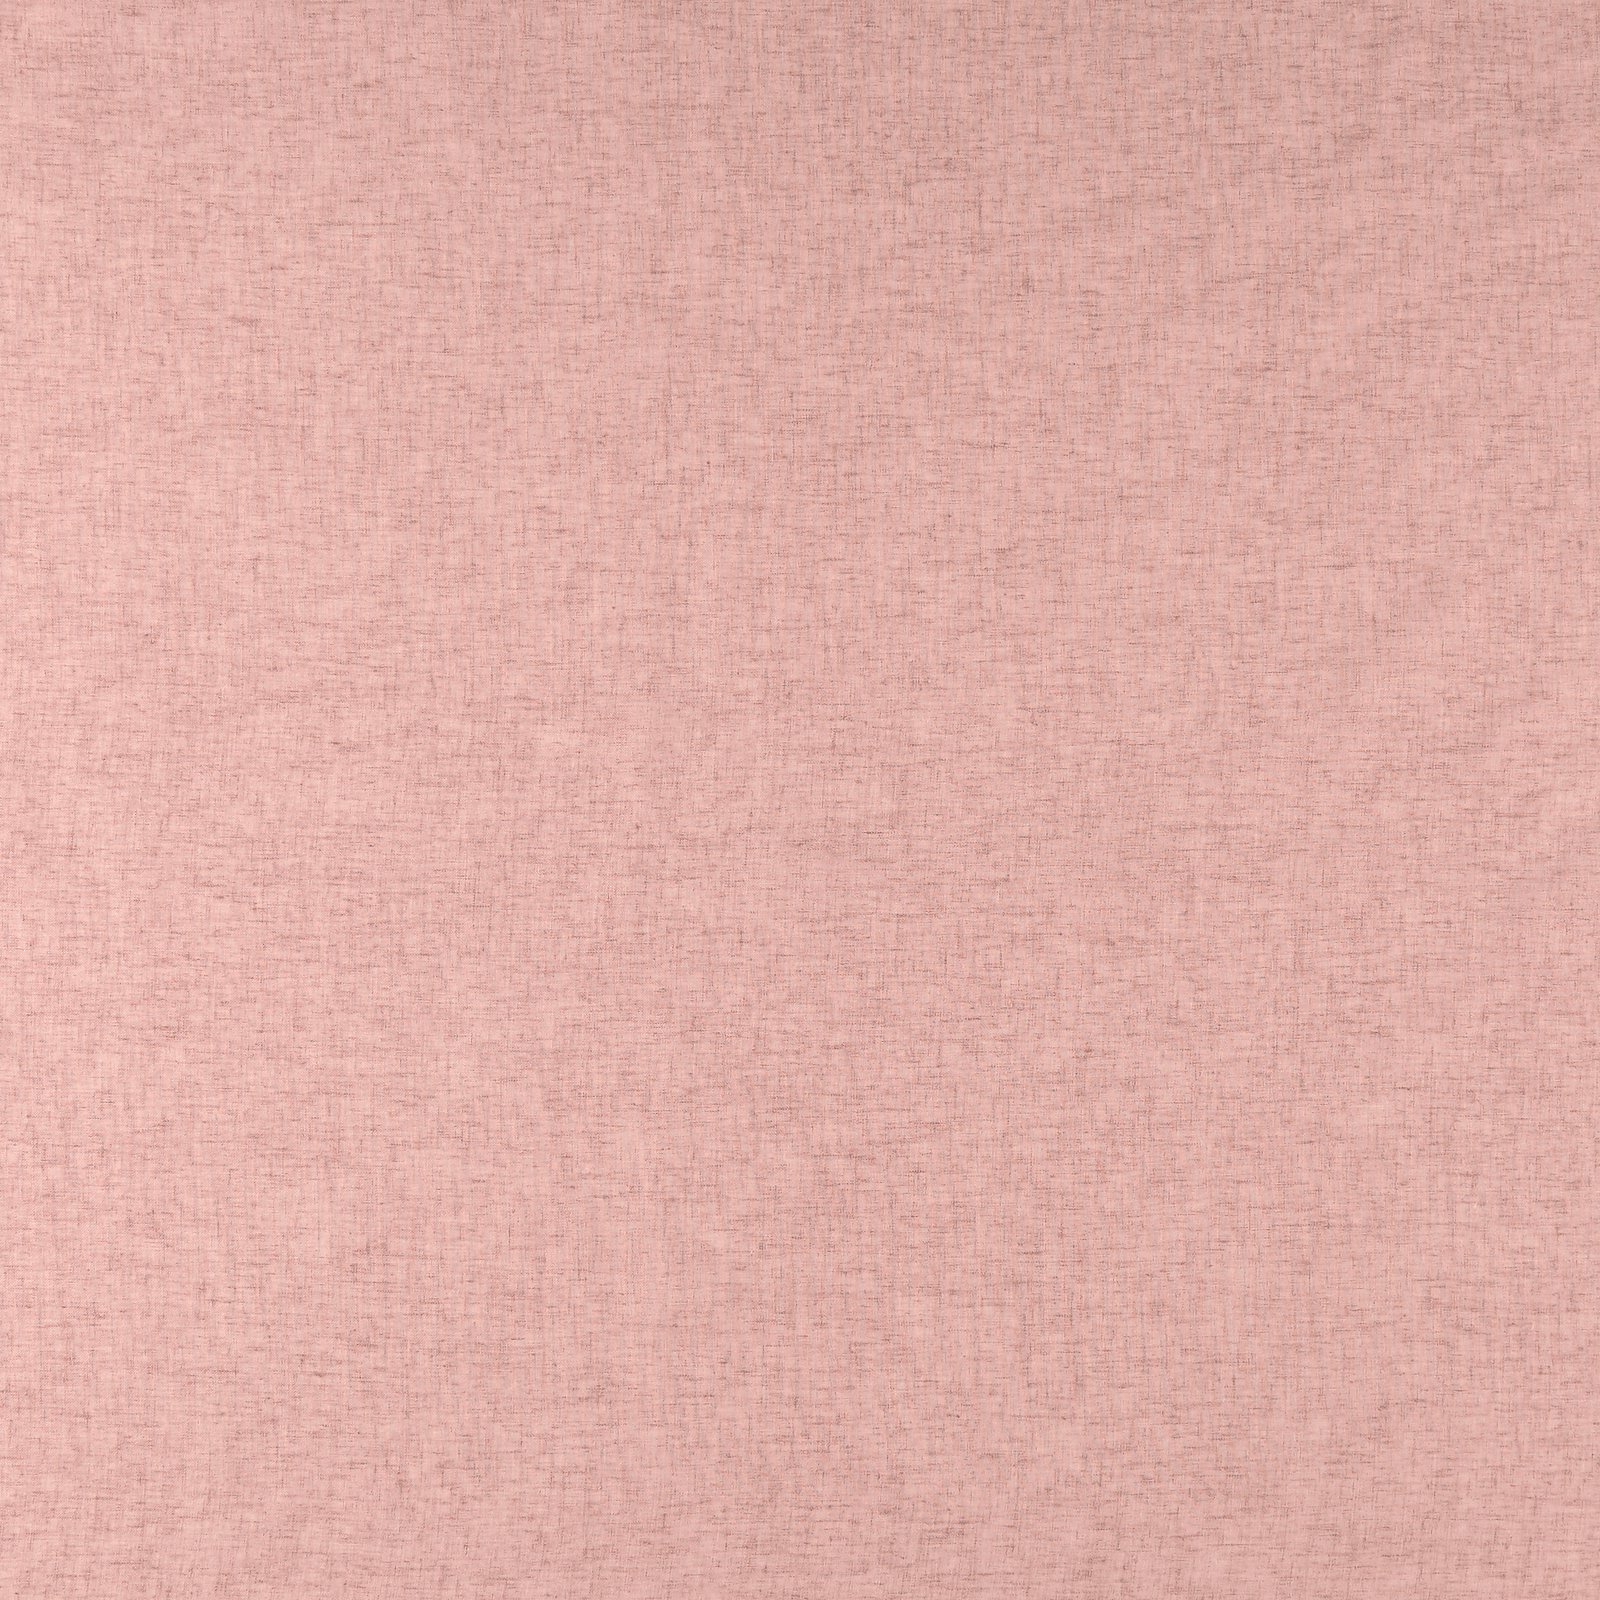 Voile mörk rosa polyester/lin mix 835181_pack_solid